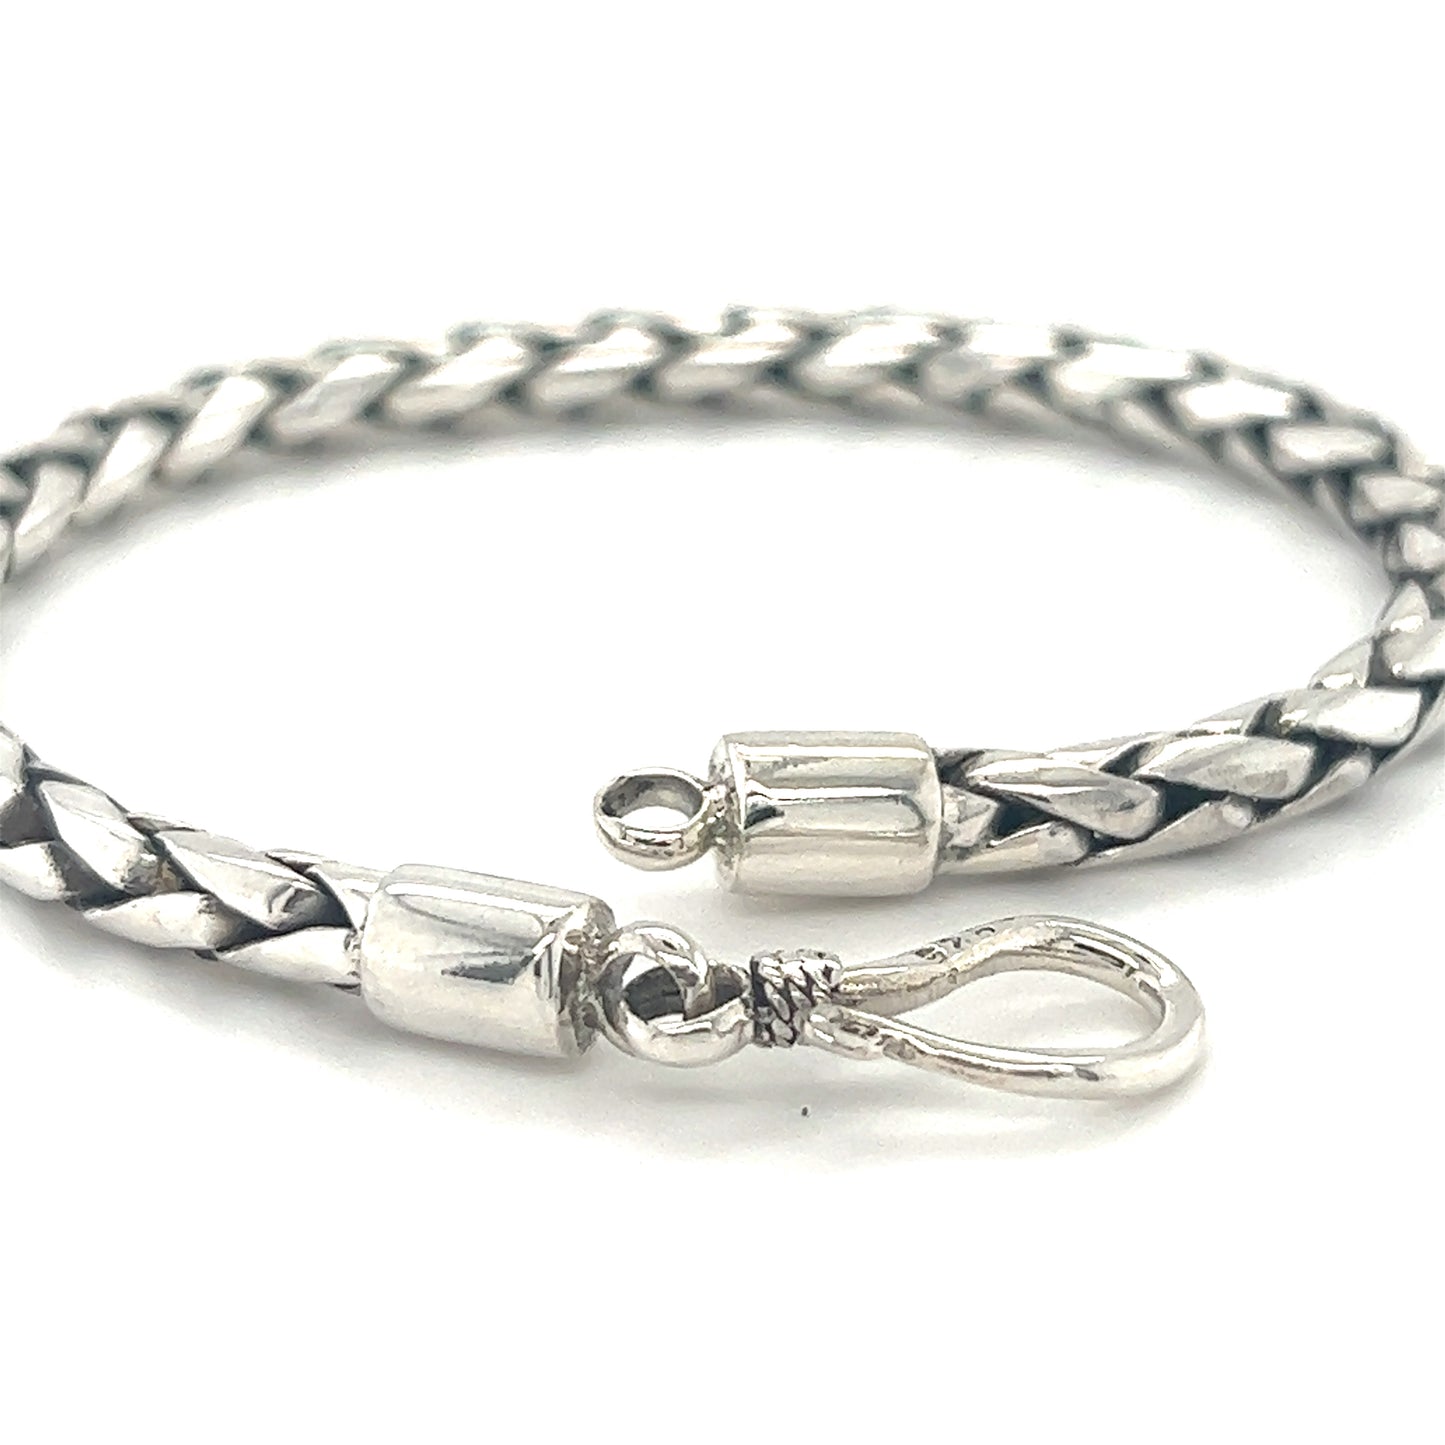 
                  
                    Close-up of a 4mm Bright Rope Bracelet with cylindrical end caps and a hook clasp. The bracelet has a bright finish and looks neatly crafted, resembling a woven rope bracelet.
                  
                